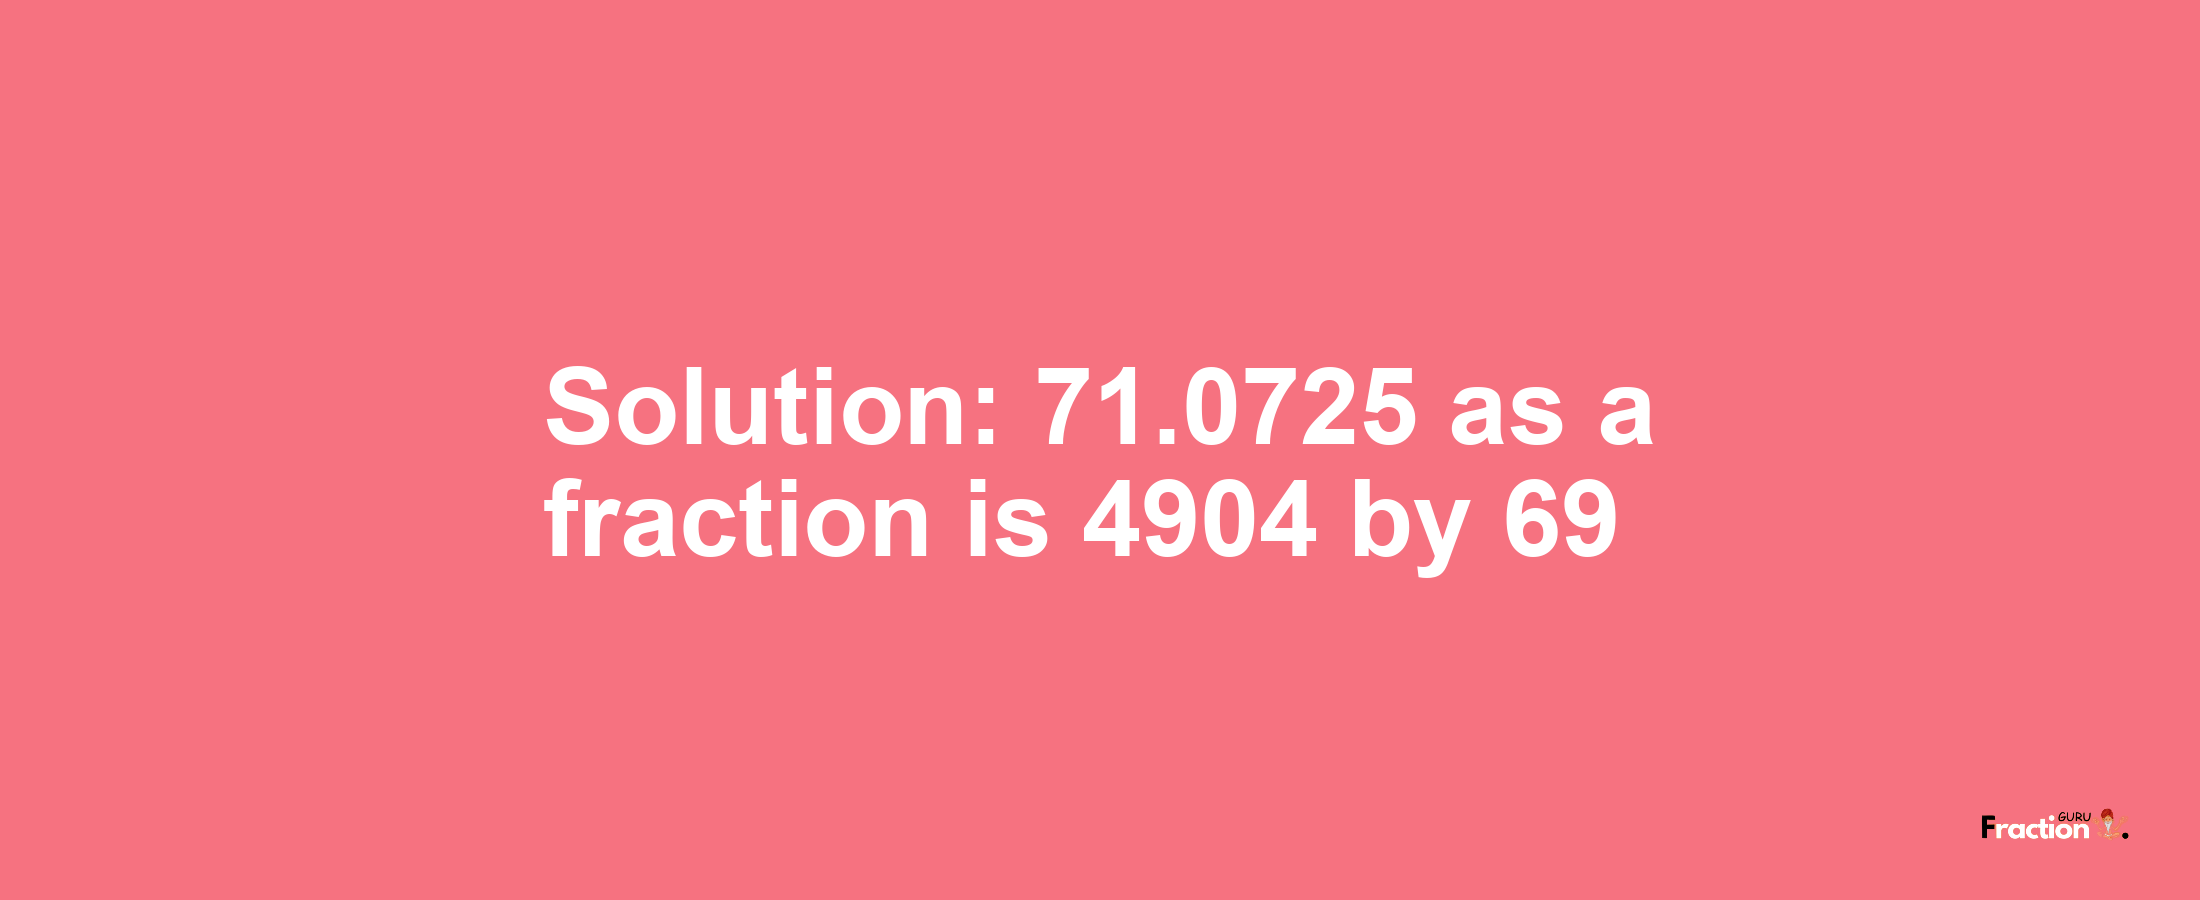 Solution:71.0725 as a fraction is 4904/69